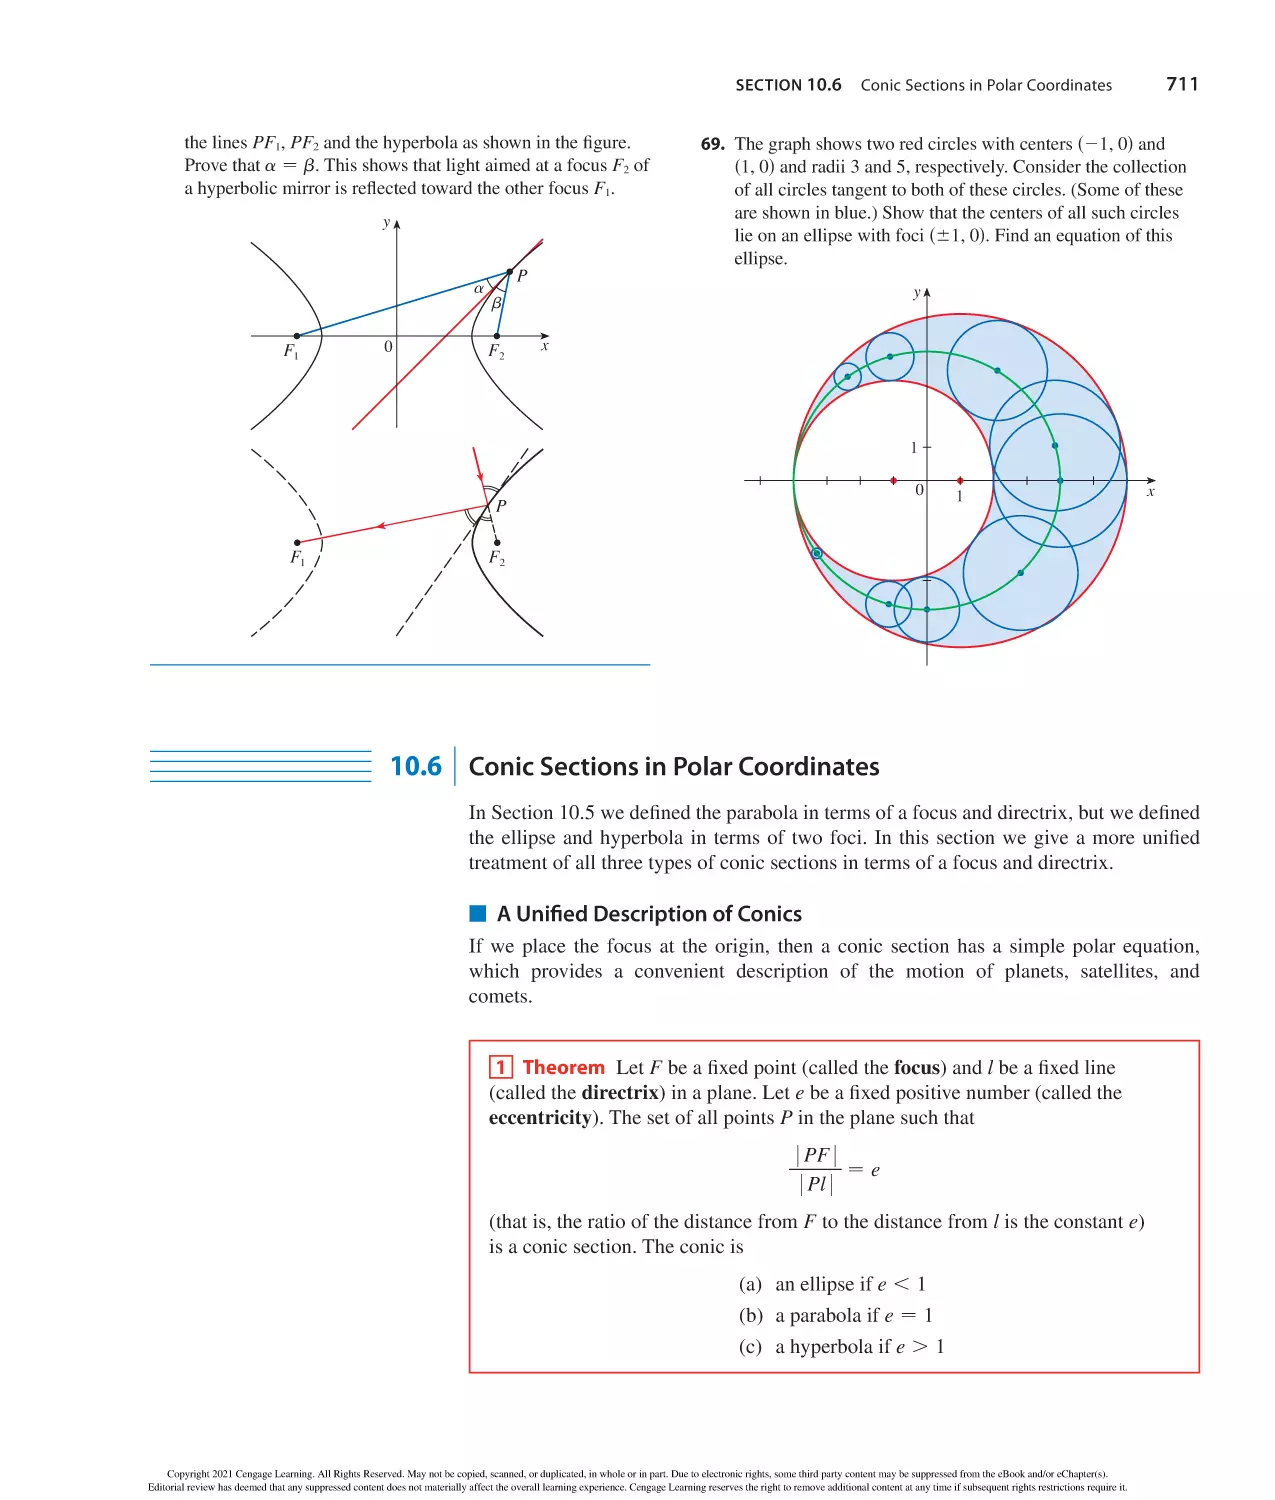 10.6 Conic Sections in Polar Coordinates